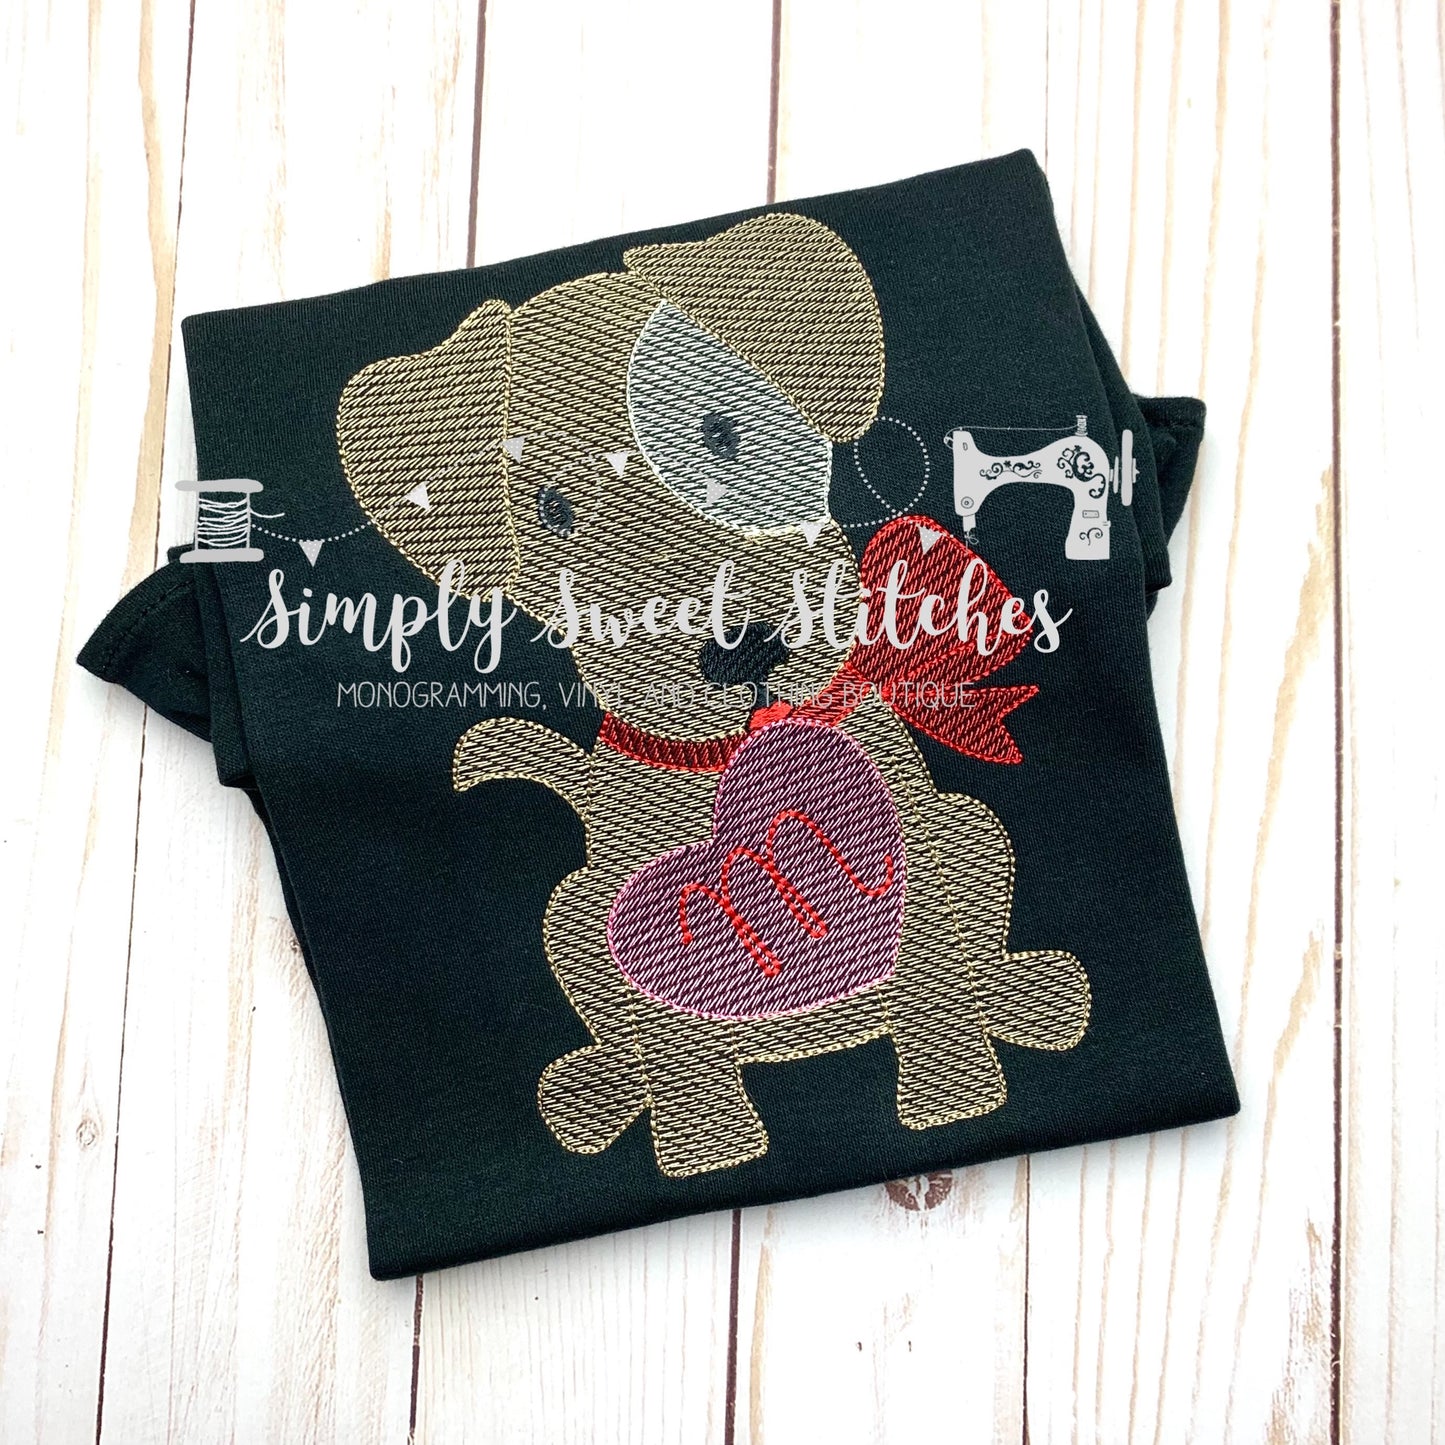 1596  - GIRL PUP WITH HEART SKETCH APPLIQUE - CHILD SHIRT